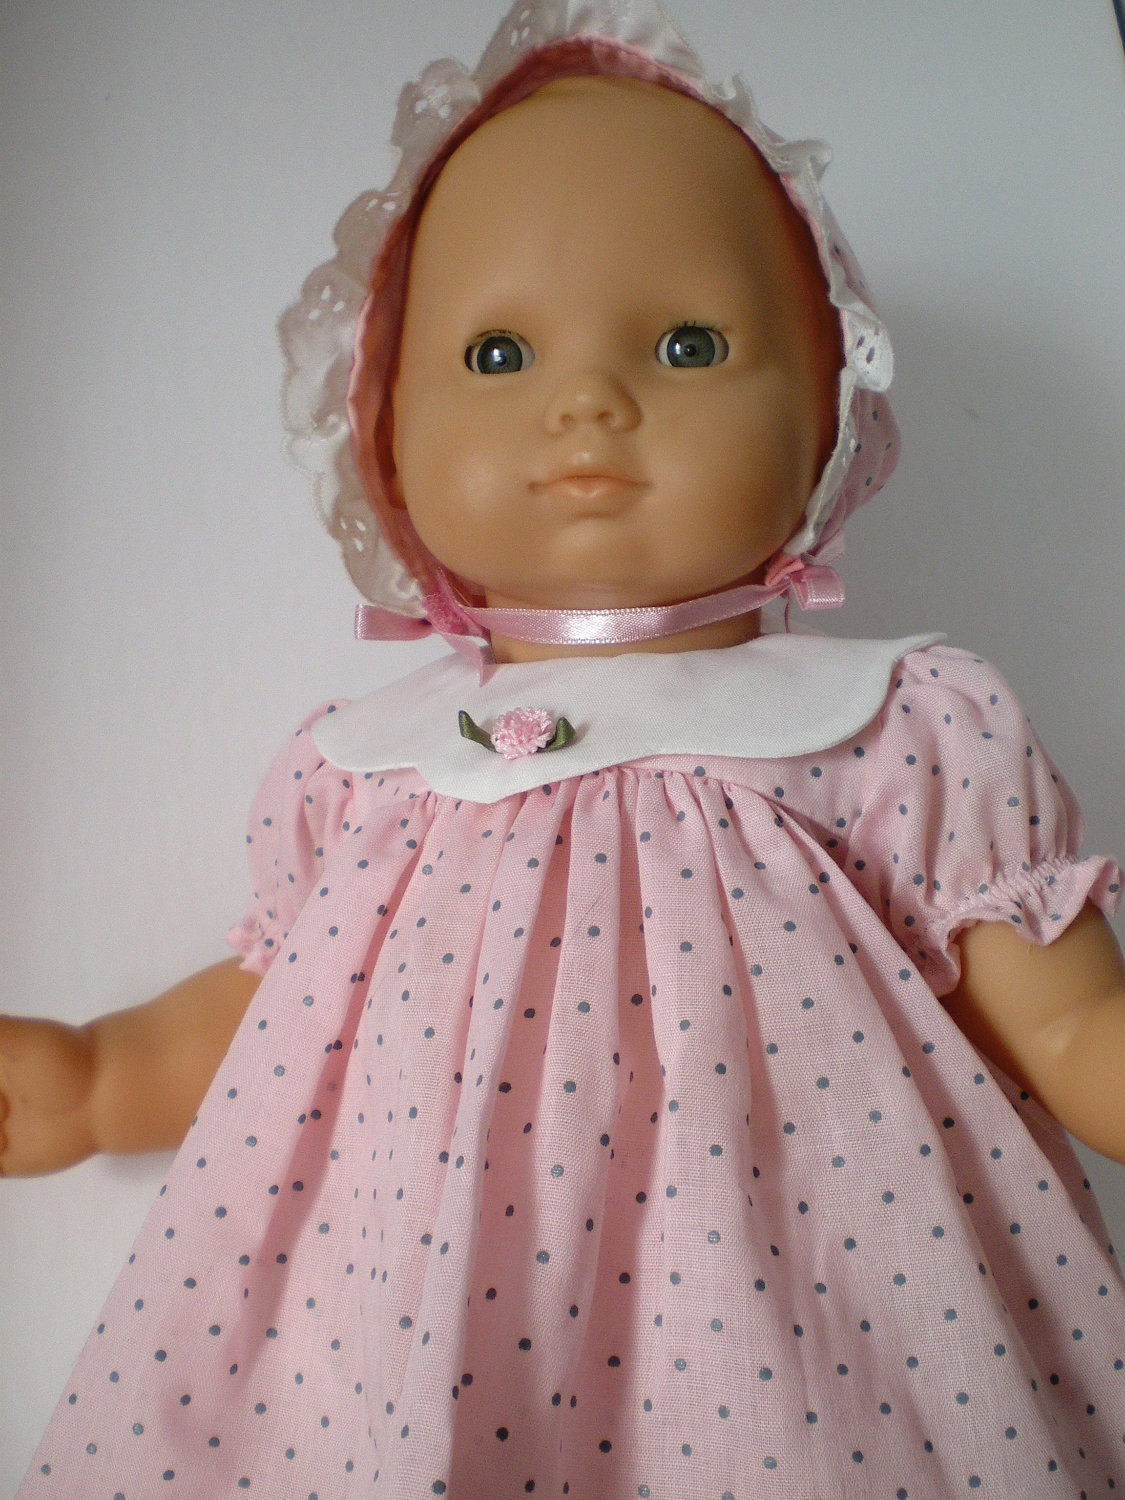 Baby Doll Fashion
 Bitty Baby Doll Clothes Polka dot DressBonnet by fashioned4you